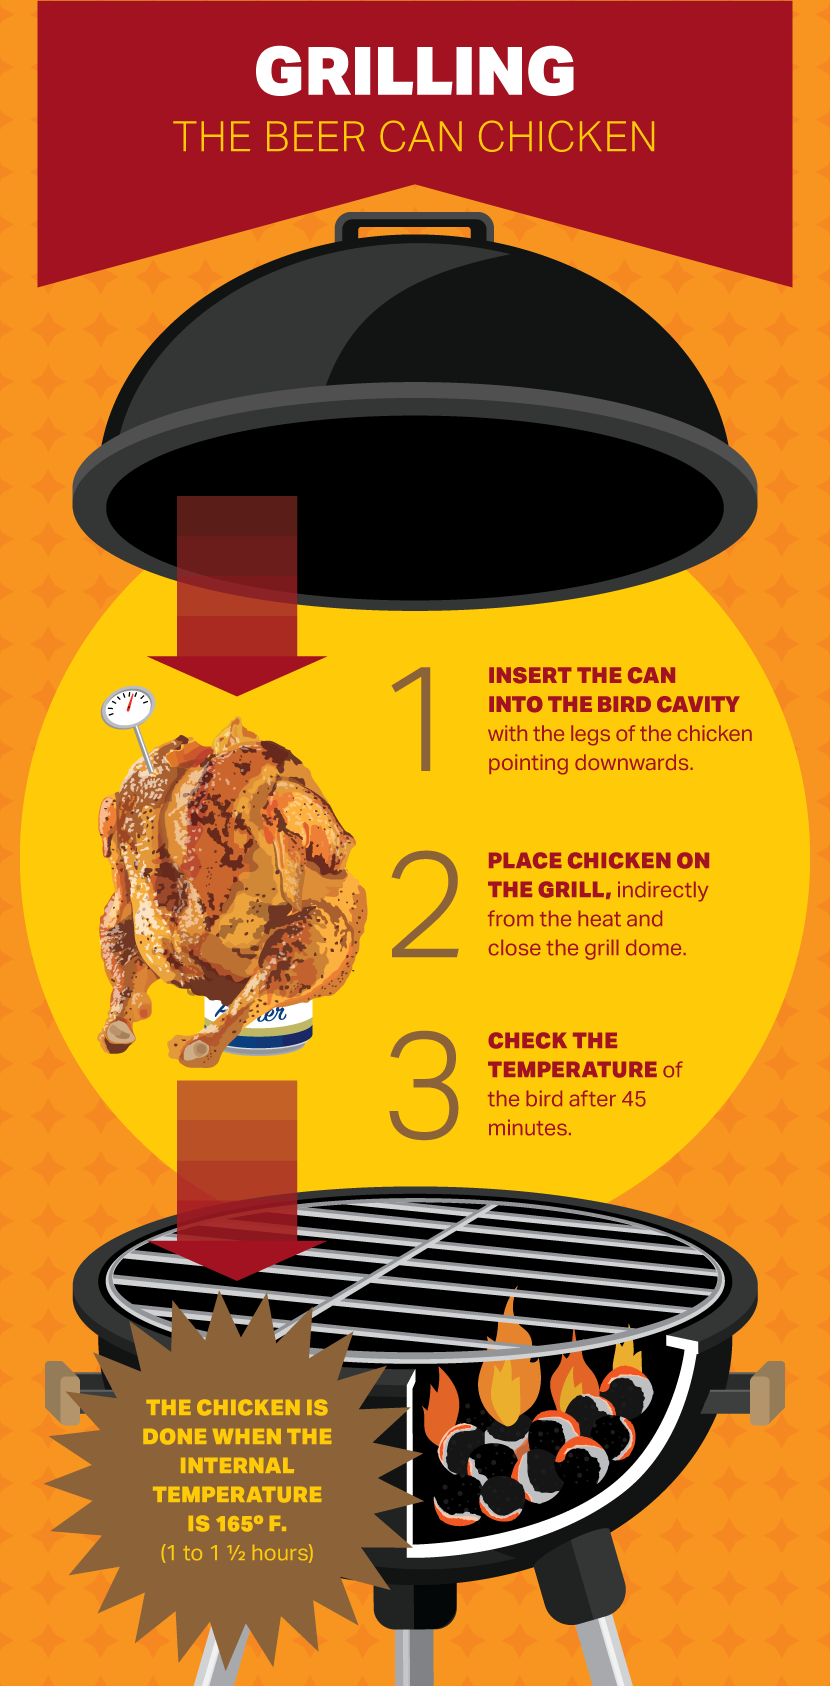 How to Grill Beer-Can Chicken - Grilling a Beer-Can Chicken